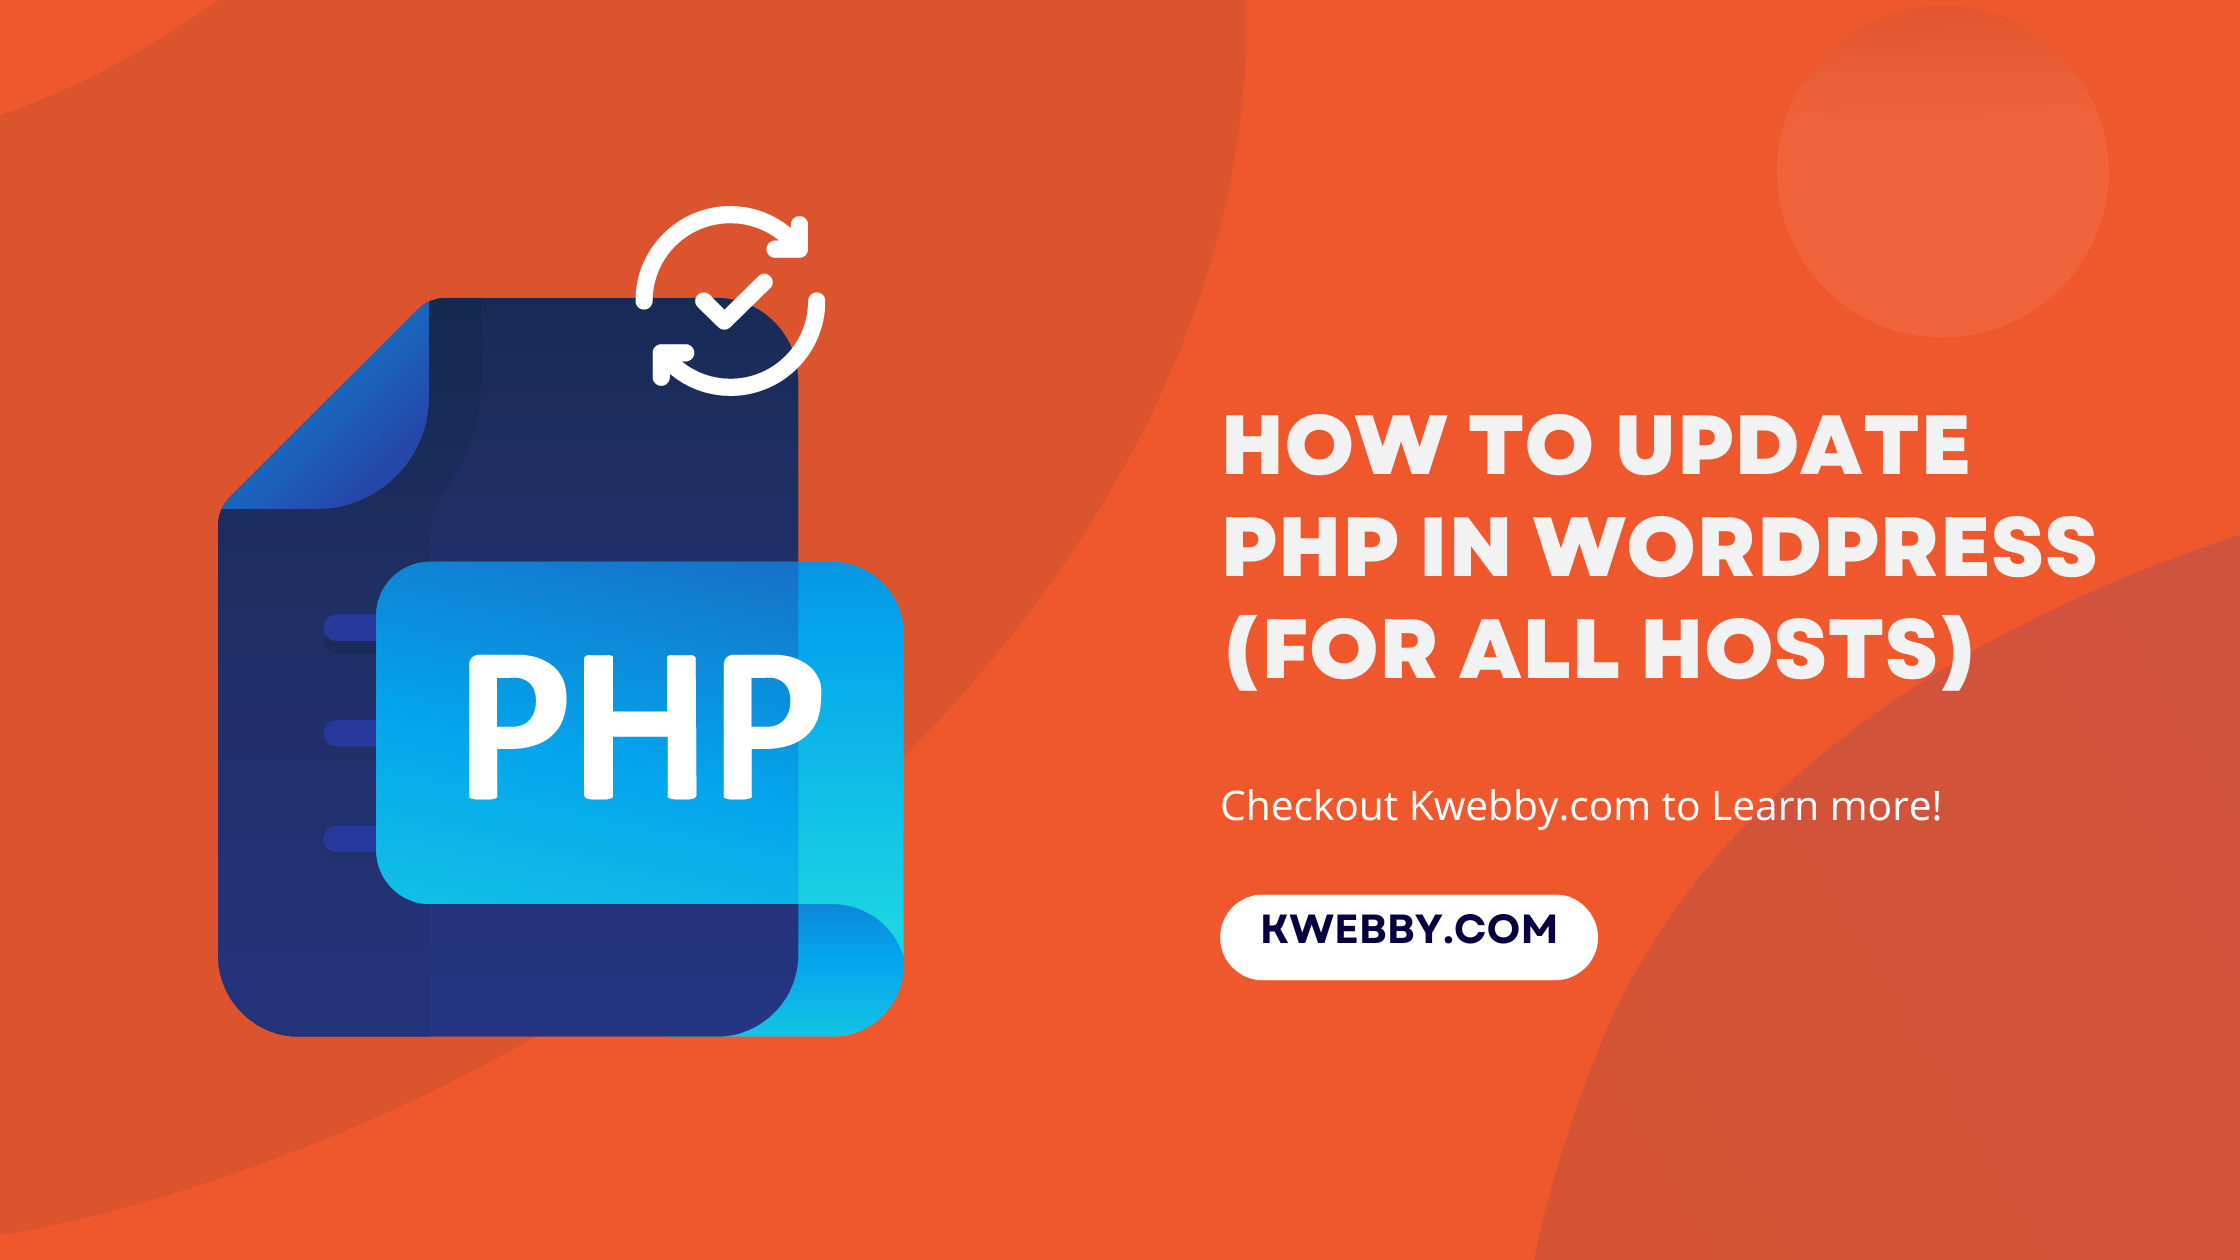 How to Update PHP in WordPress (For All Hosts)